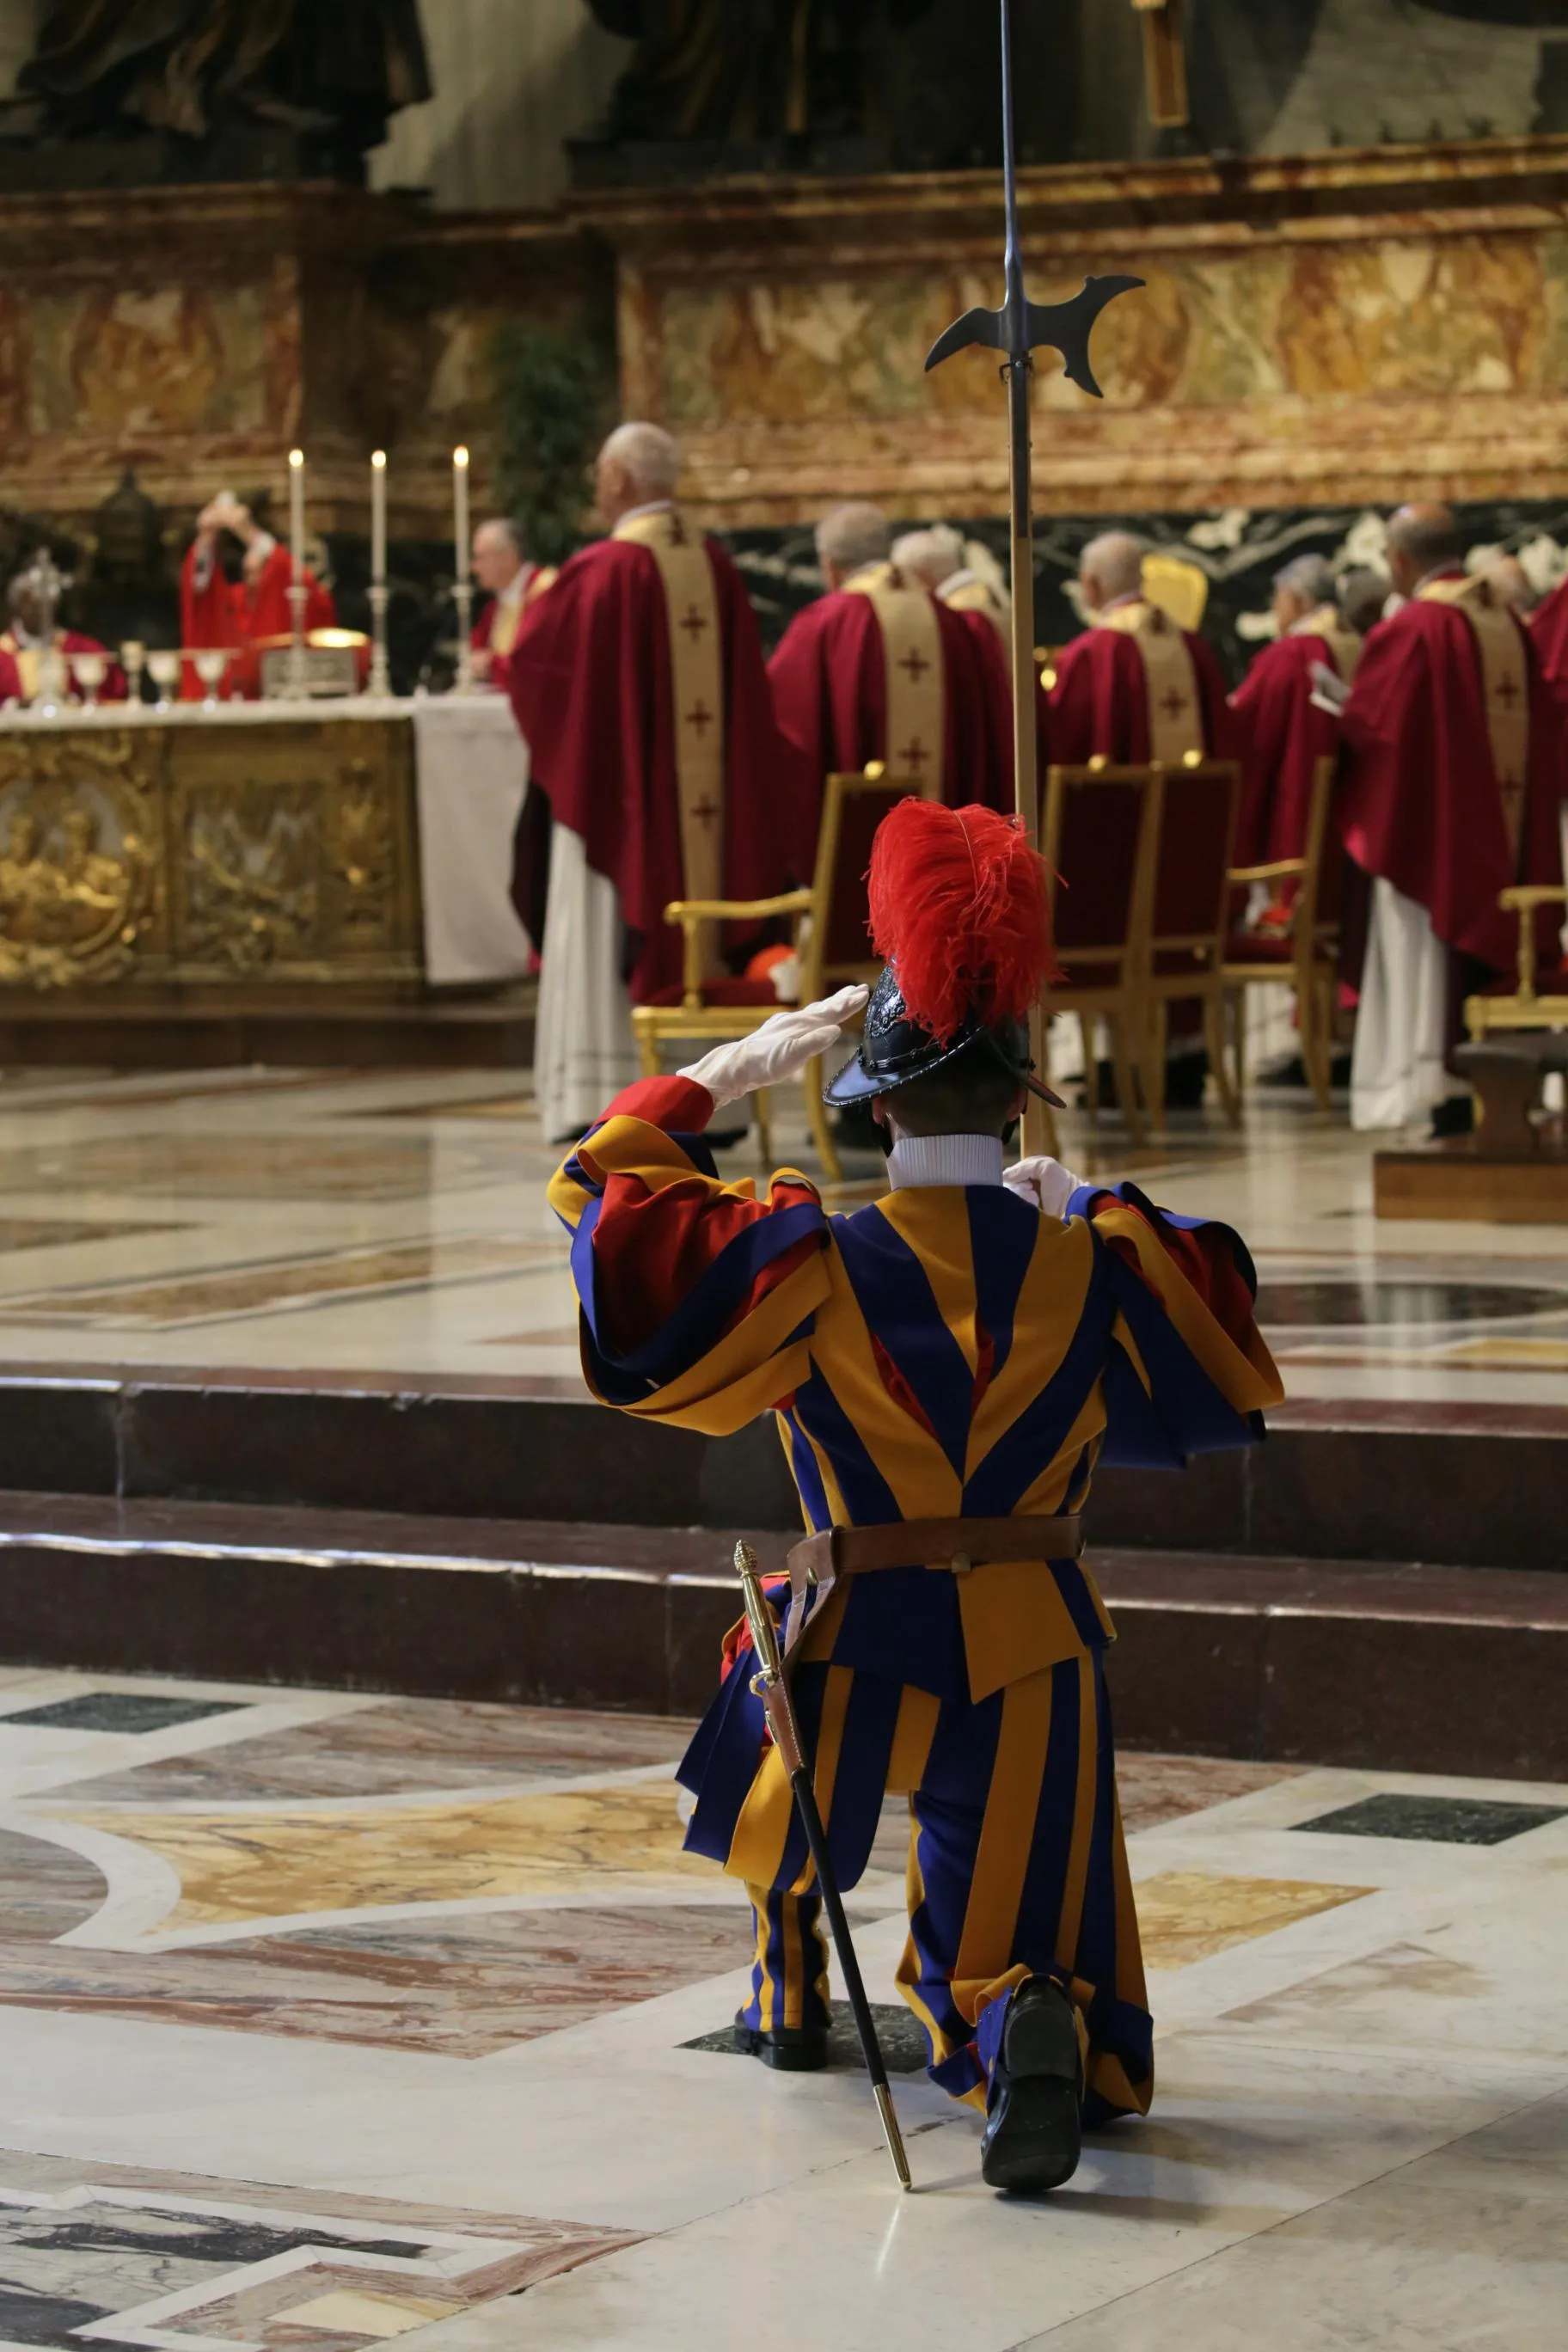 A Swiss Guard genuflects during the consecration at Cardinal George Pell's funeral Mass on Jan. 14, 2023. Alan Koppschall/CNA